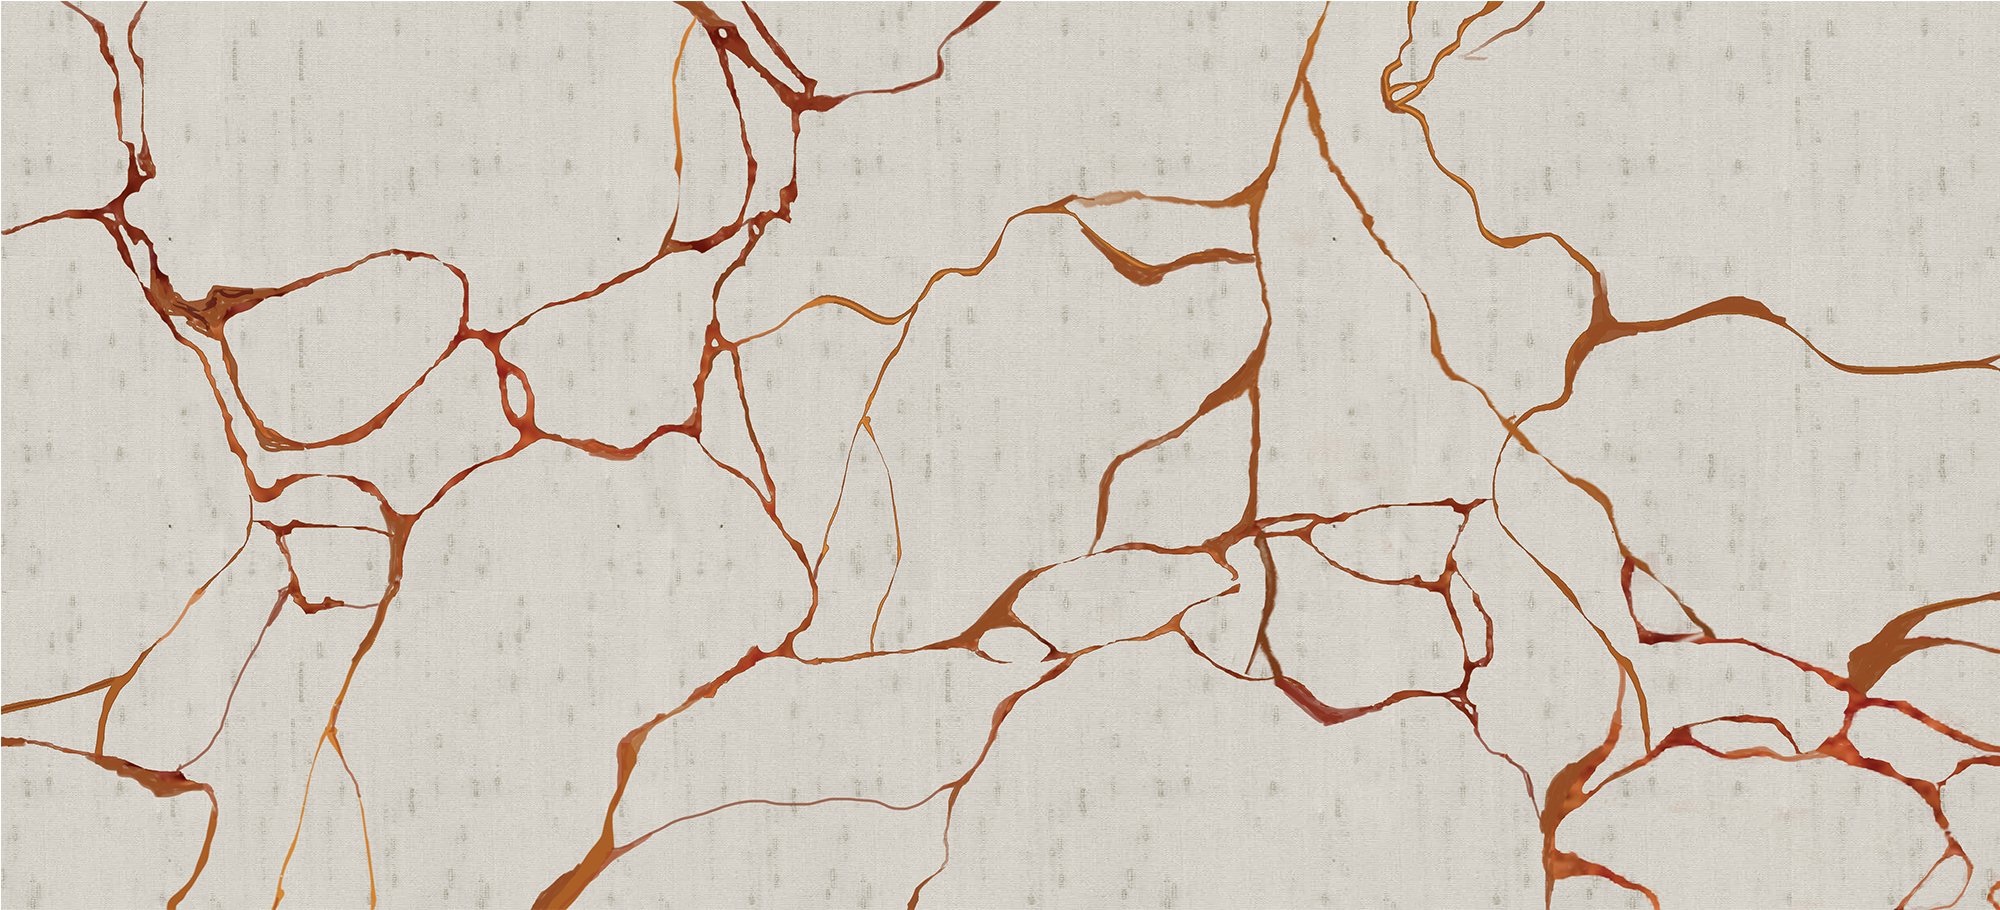 Fracture  Kintsugi Wallpaper Background for photography